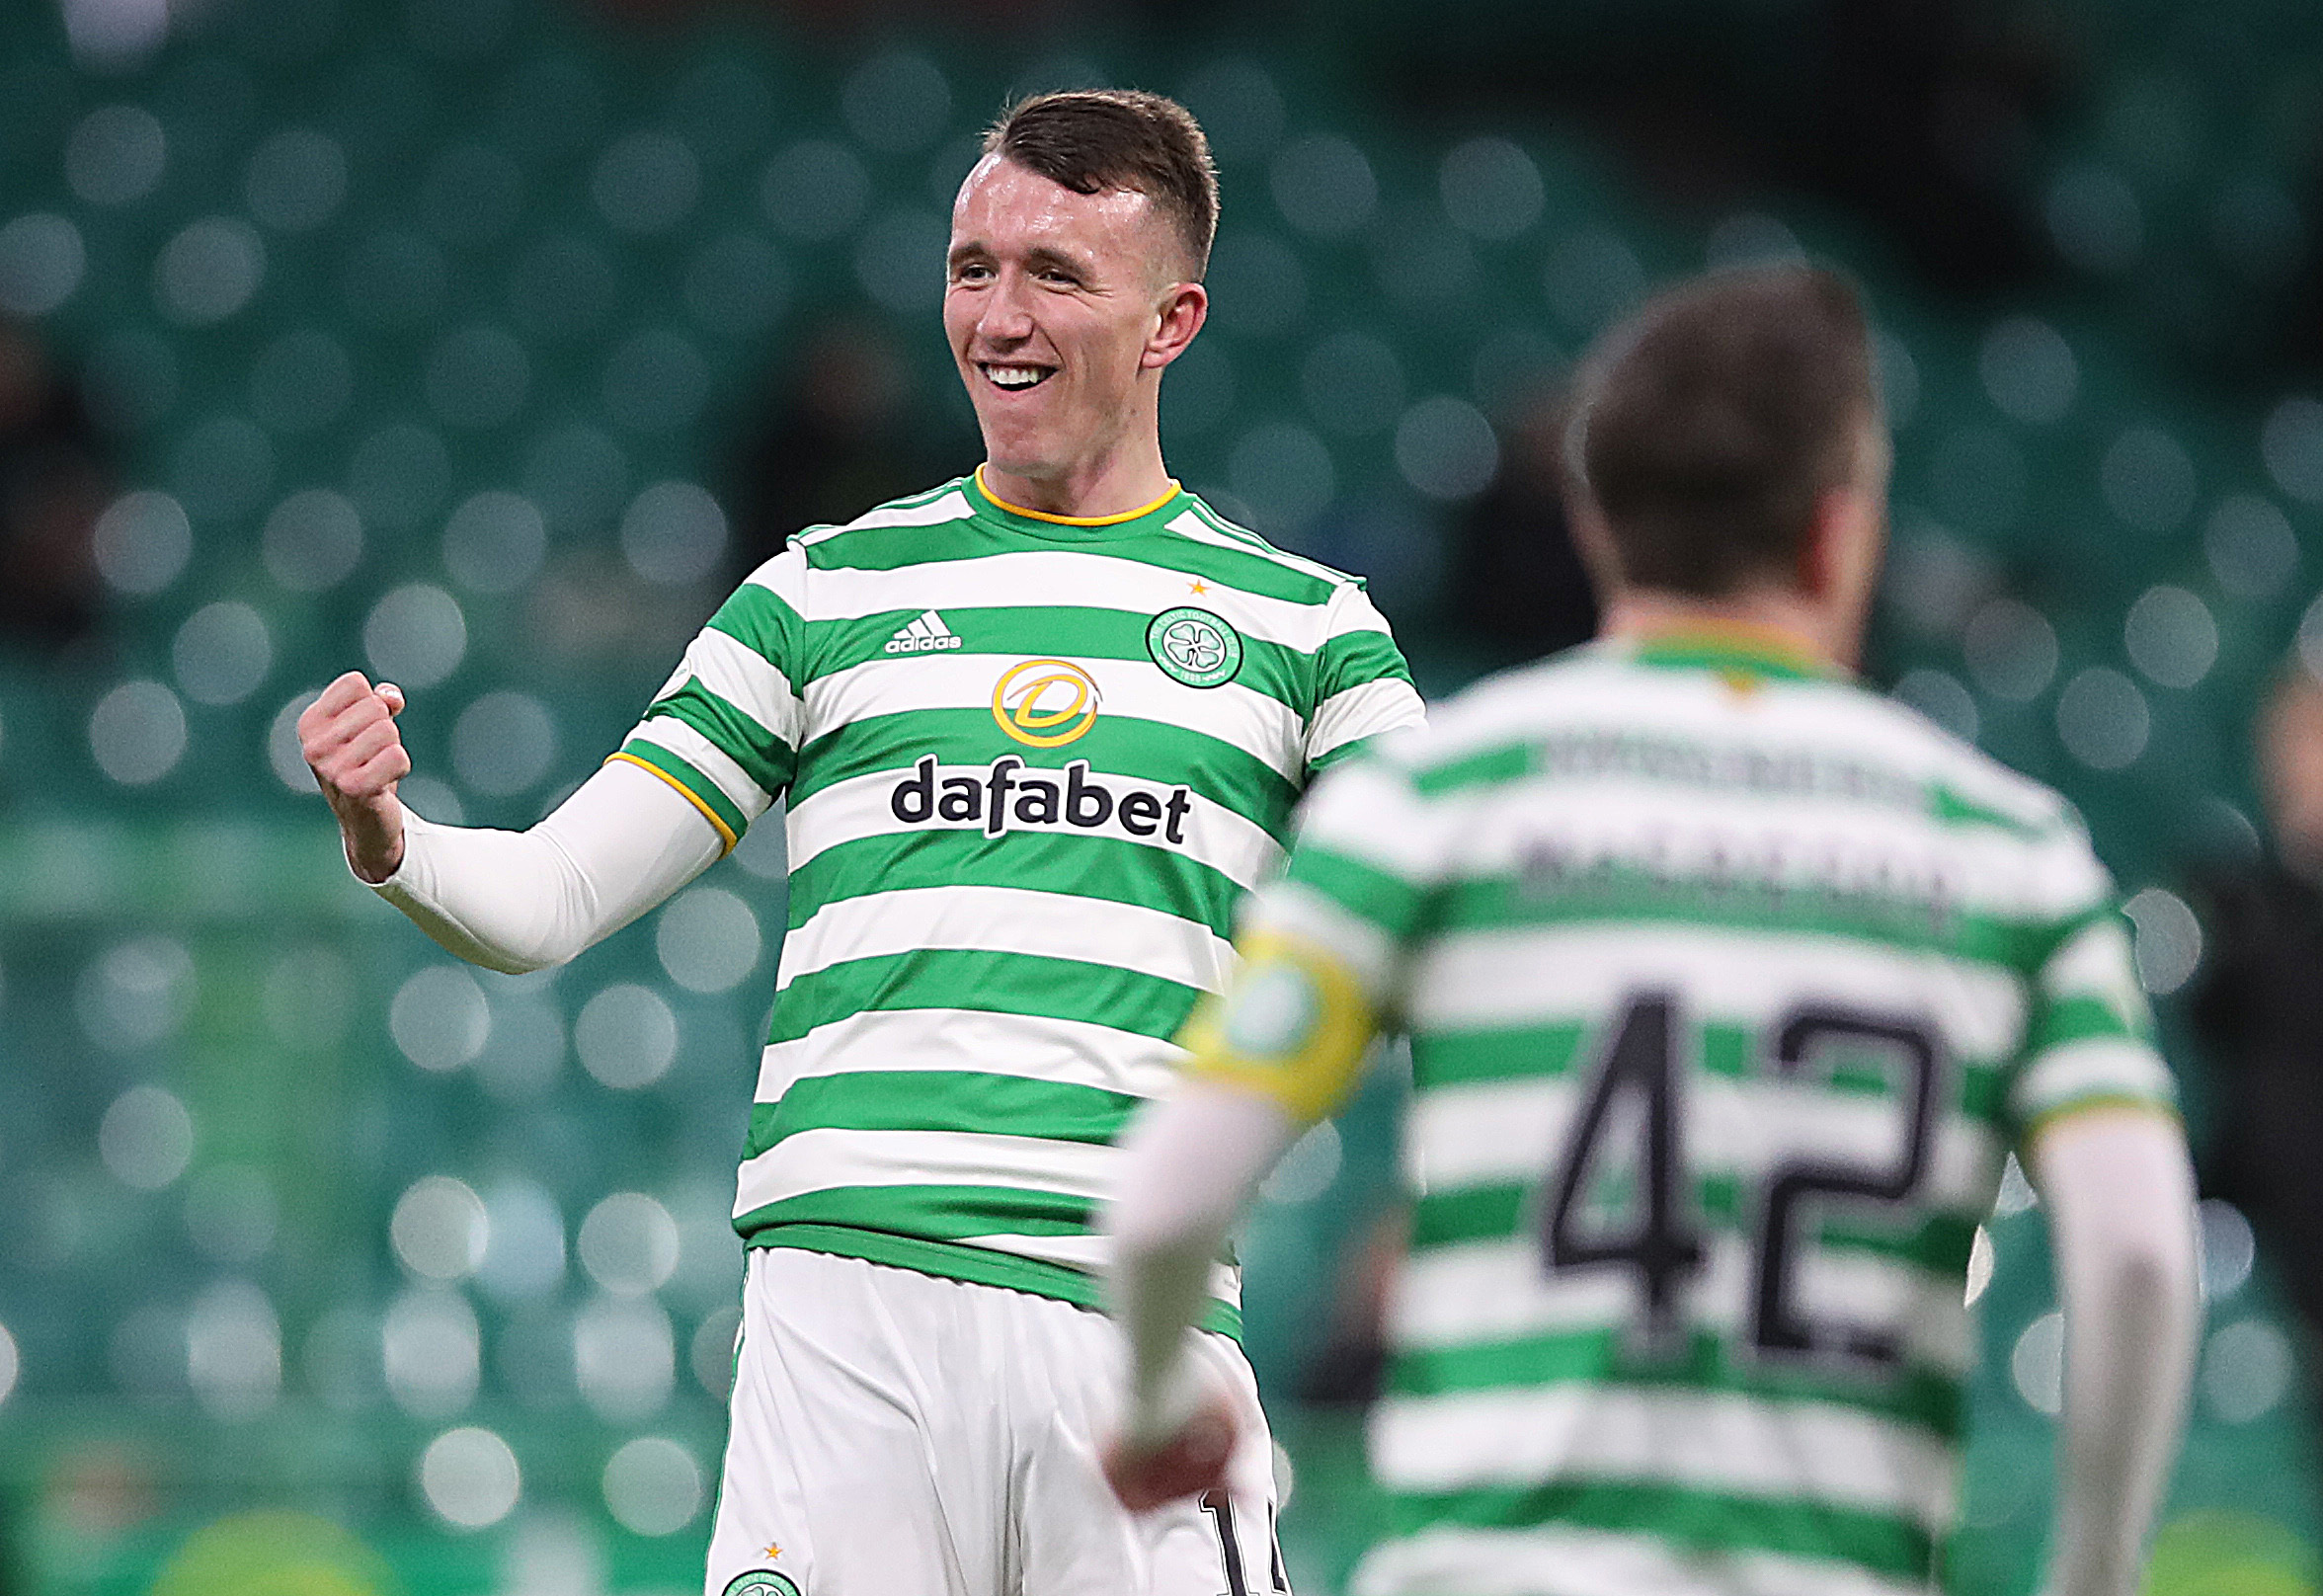 Higher than Lionel Messi: Celtic man David Turnbull is overpowering big names in key statistic